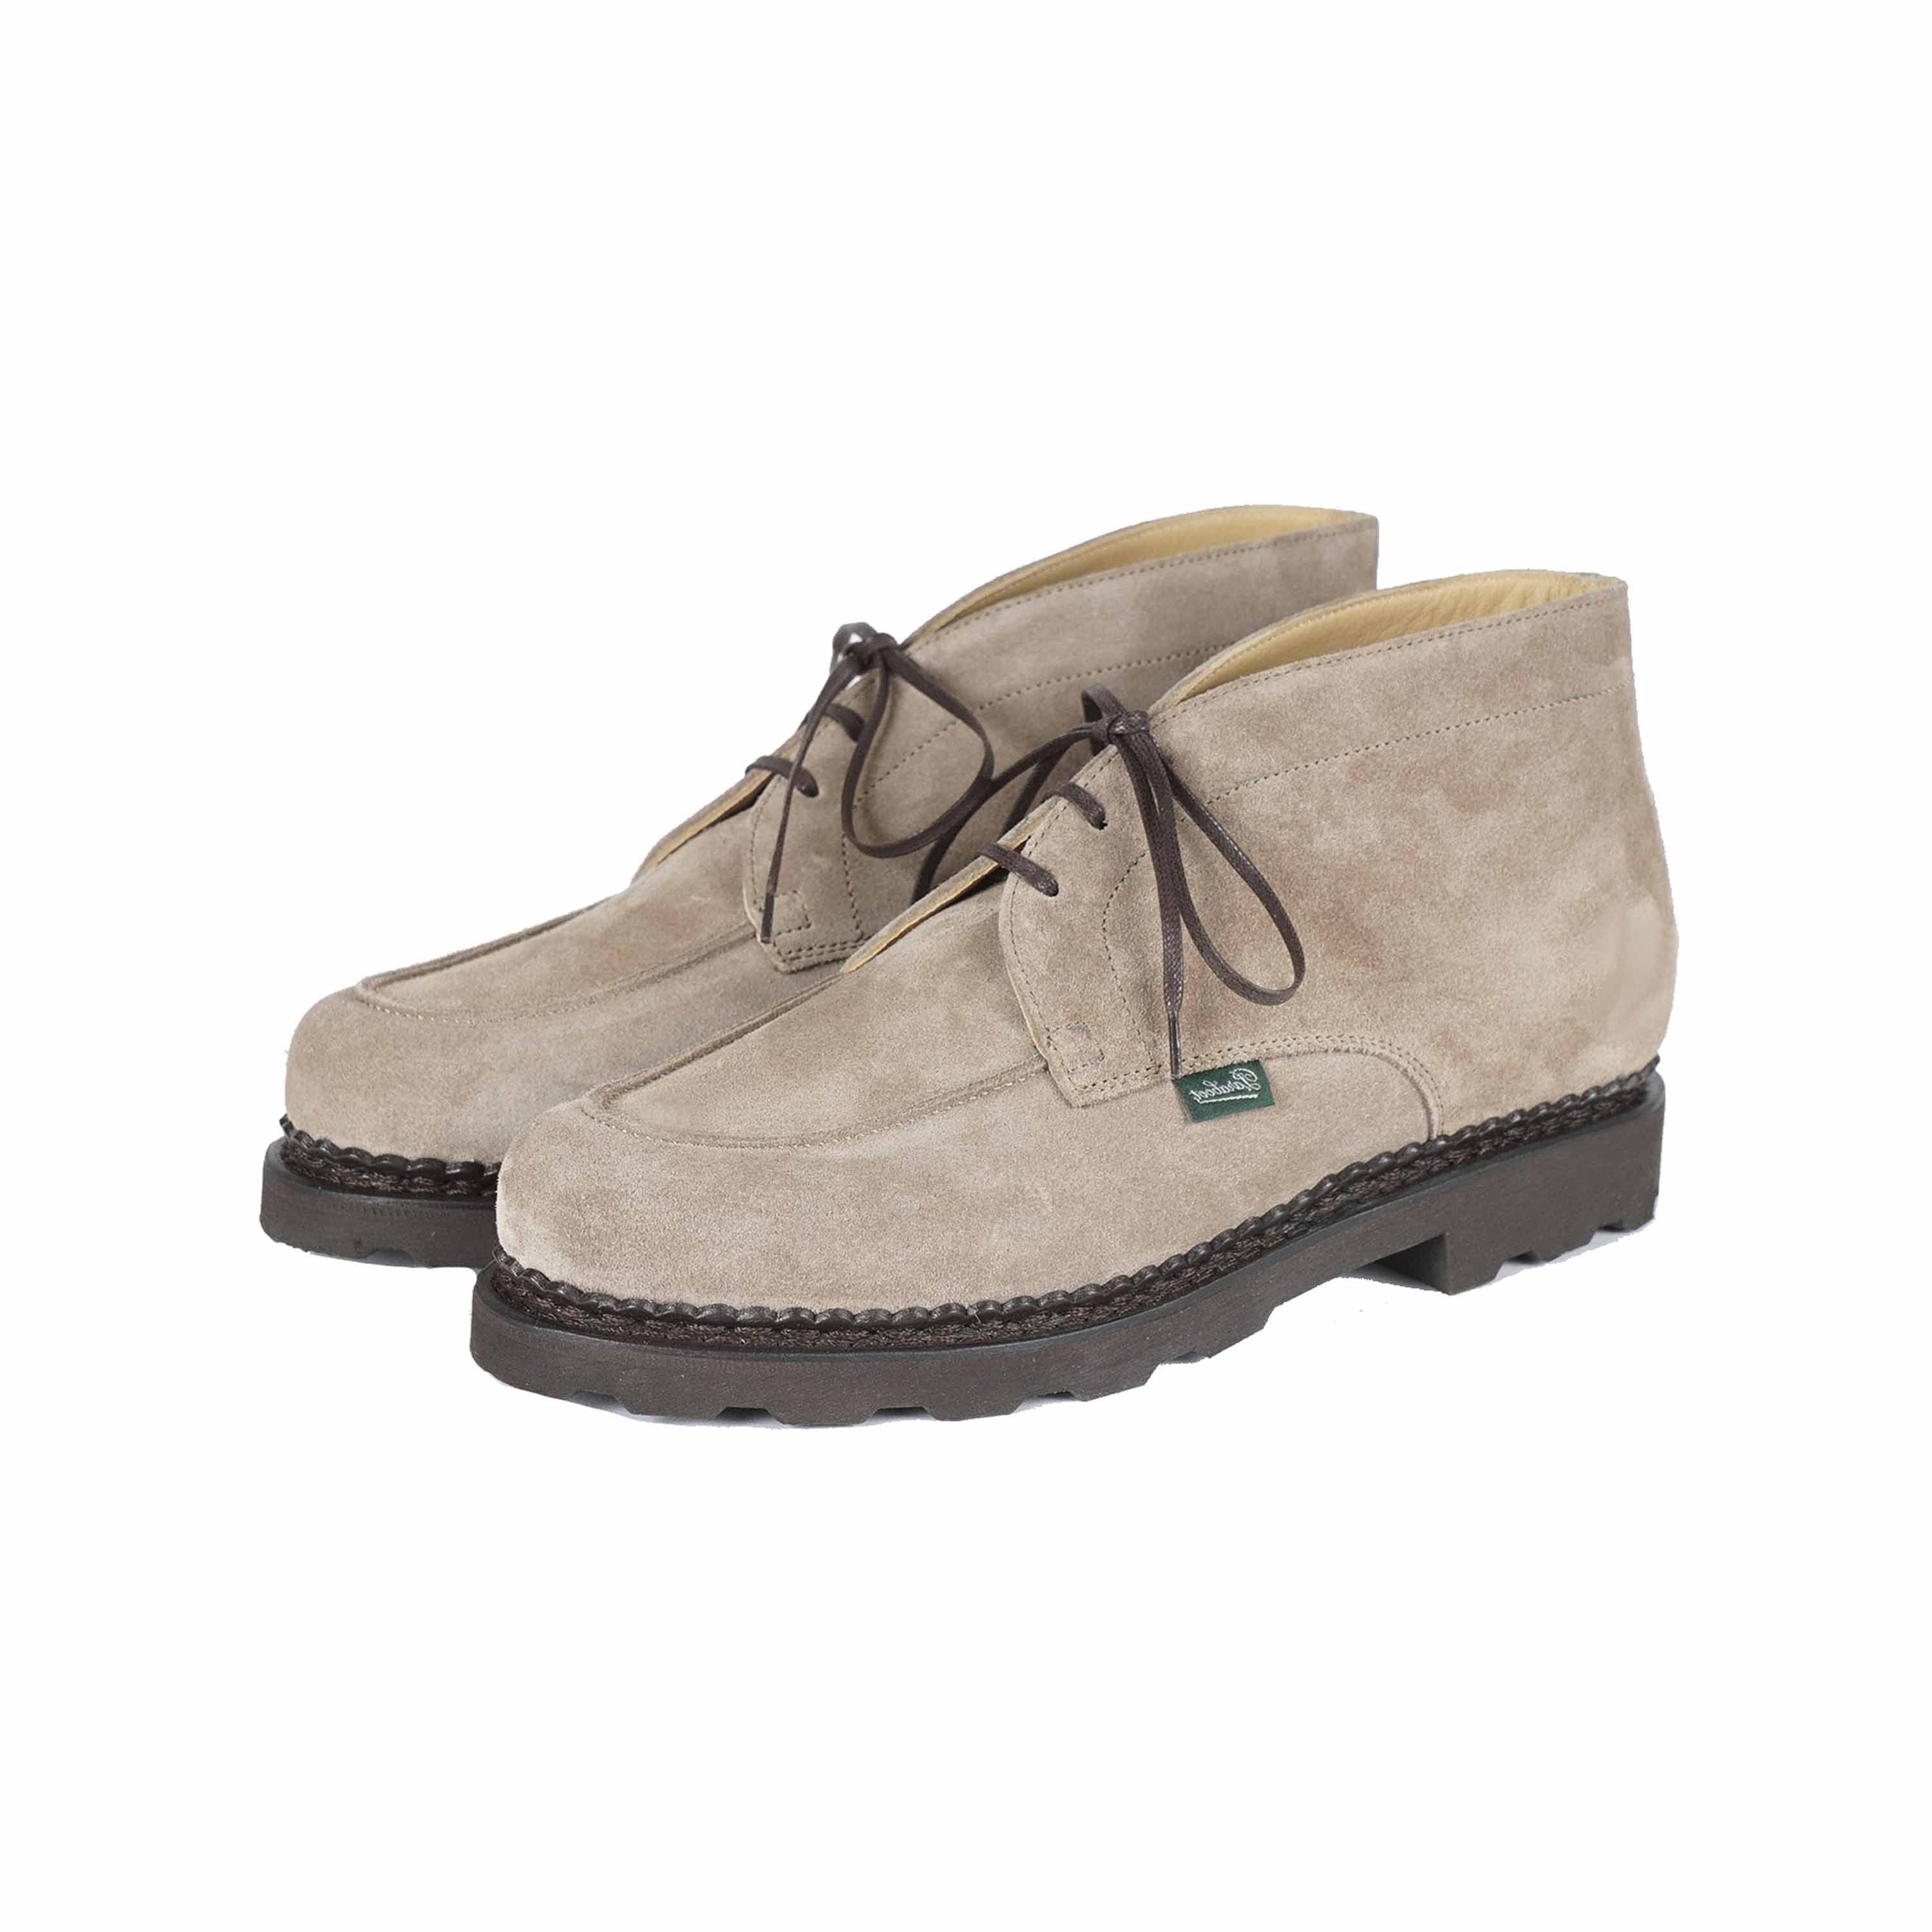 X PARABOOT CHUKKA - SESAME(SUEDE LEATHER)